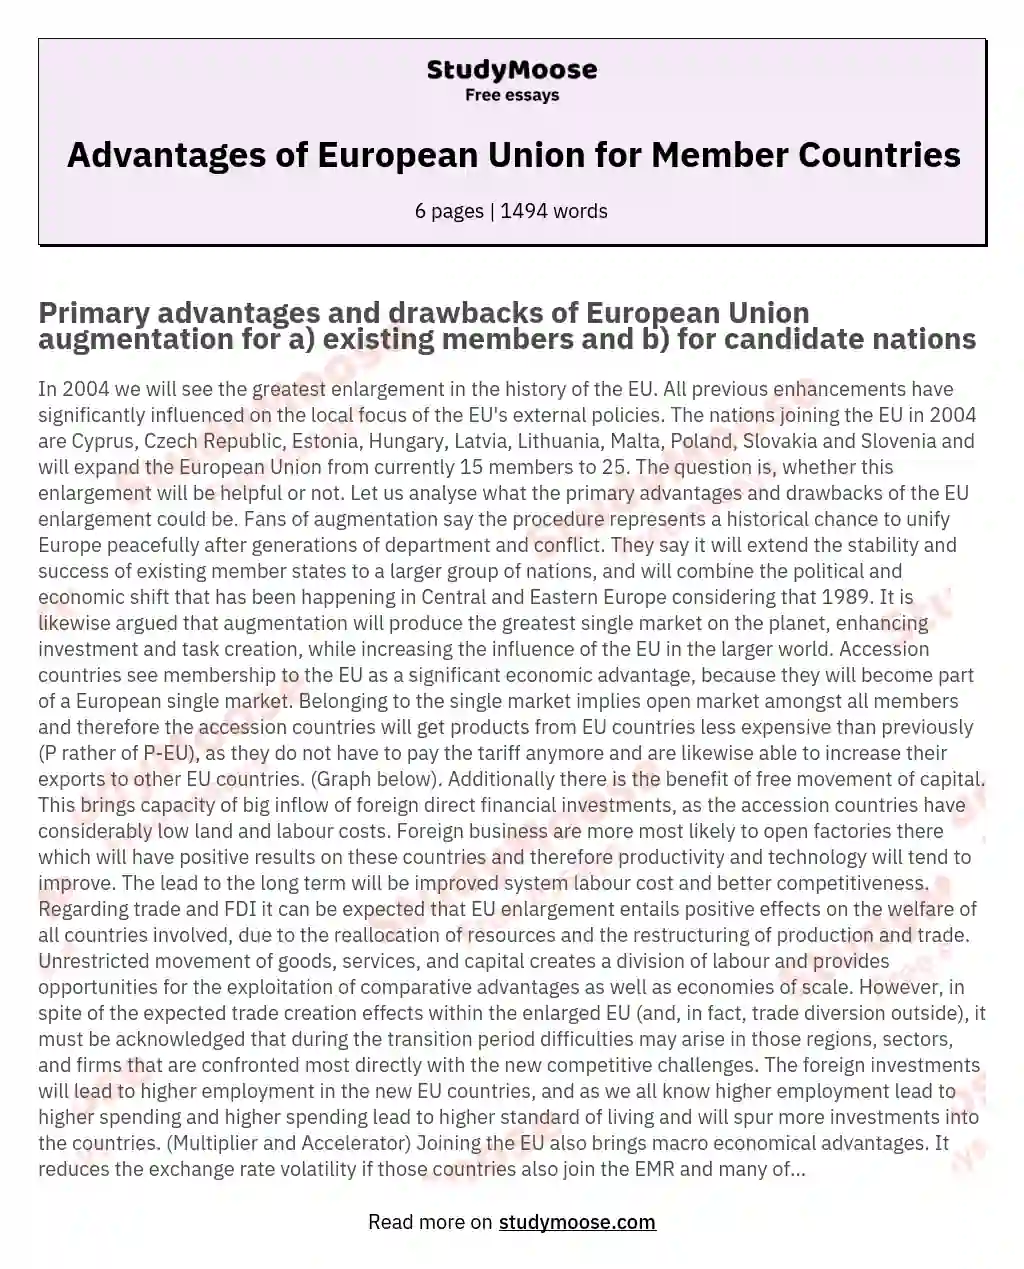 Advantages of European Union for Member Countries essay